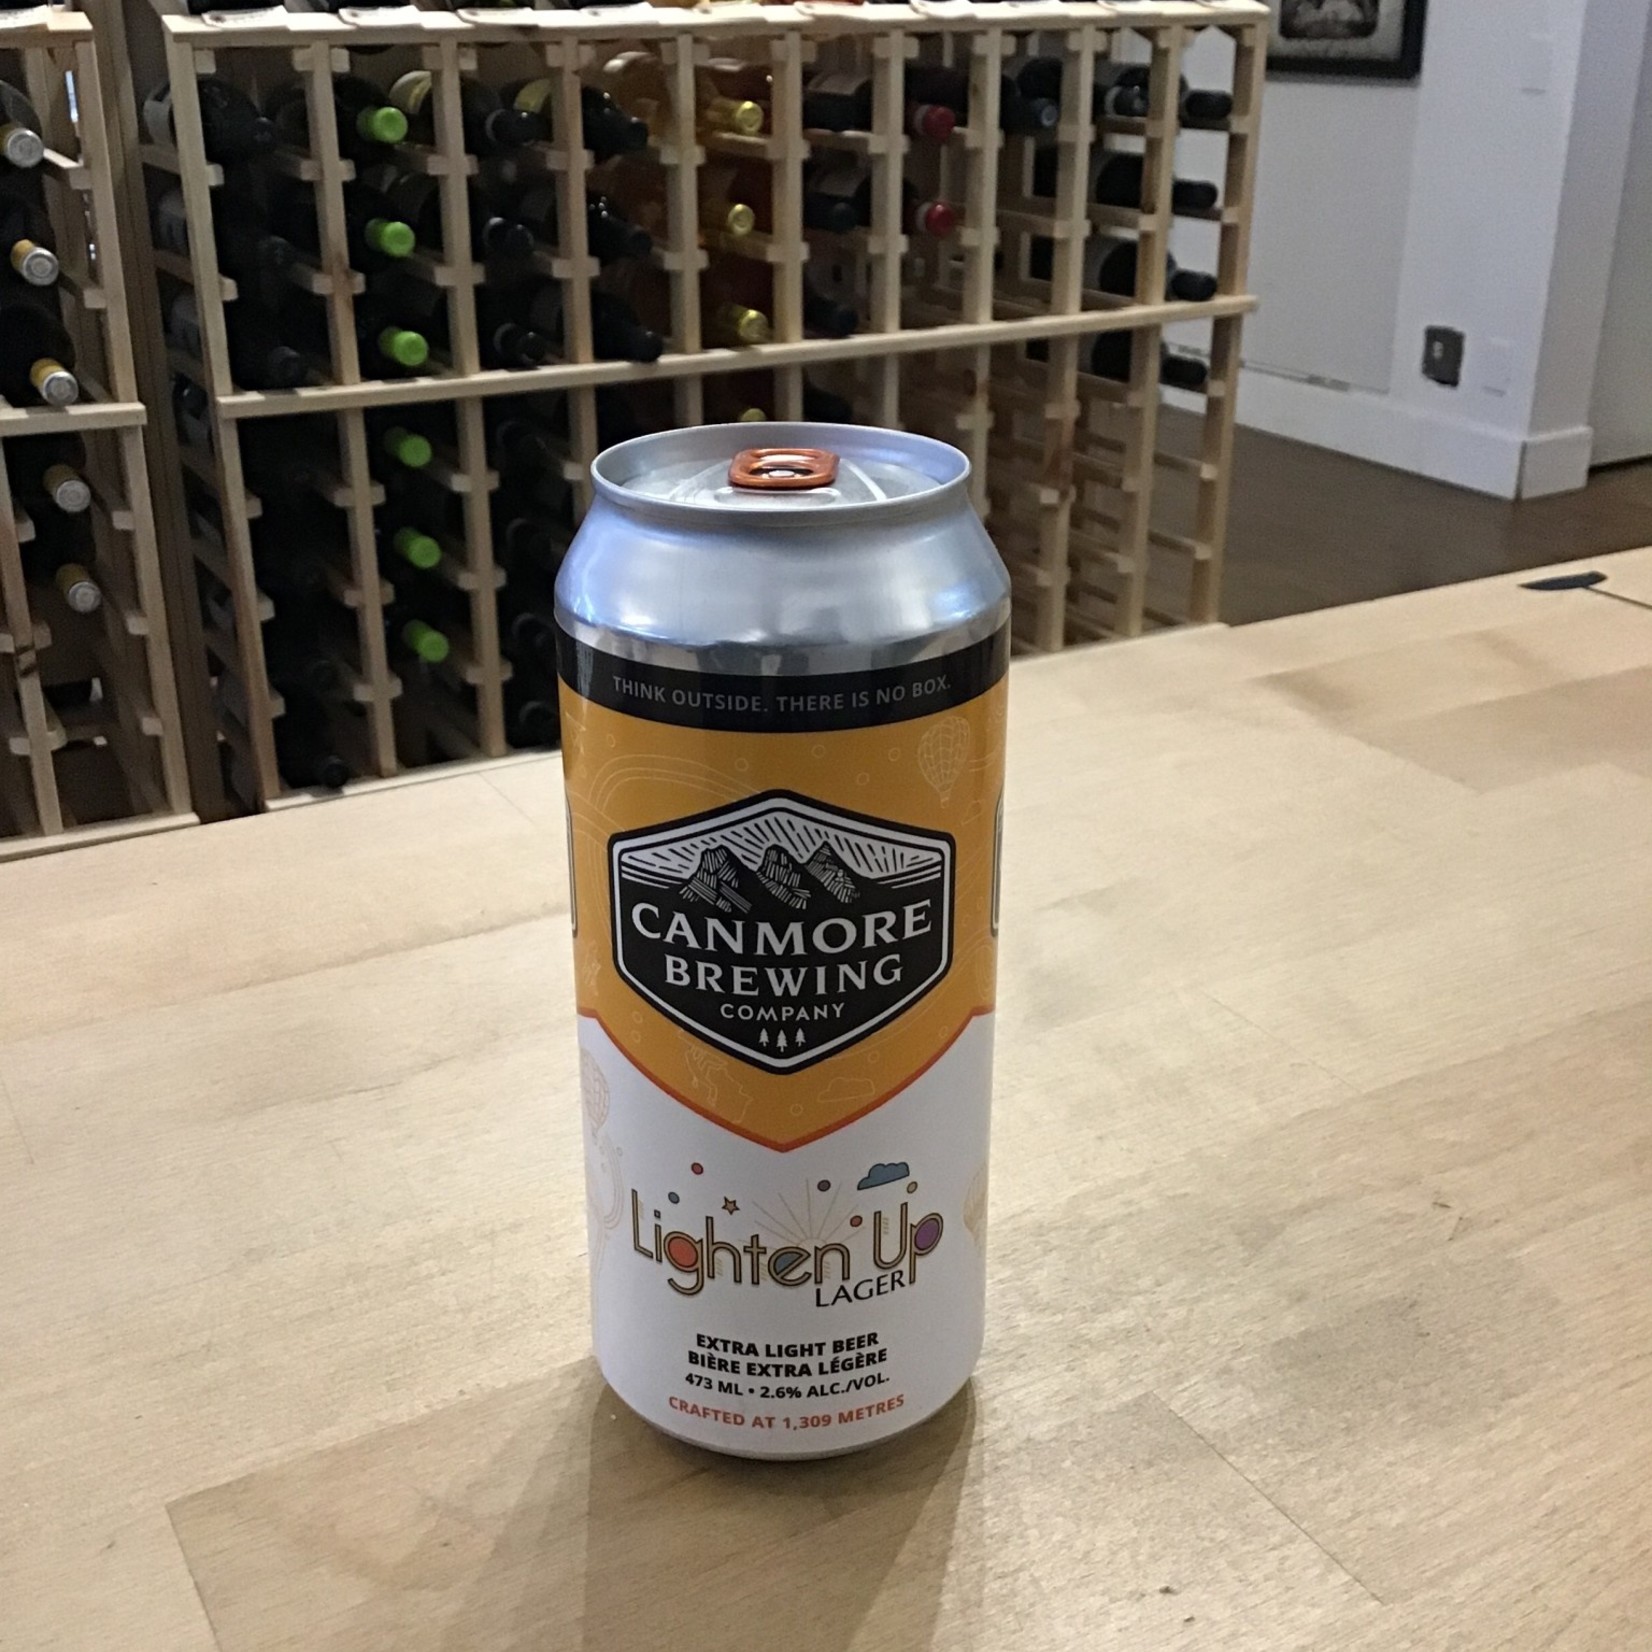 Canmore Brewing 'Lighten Up' Lager, Canmore Brewing 473ml 2.6%